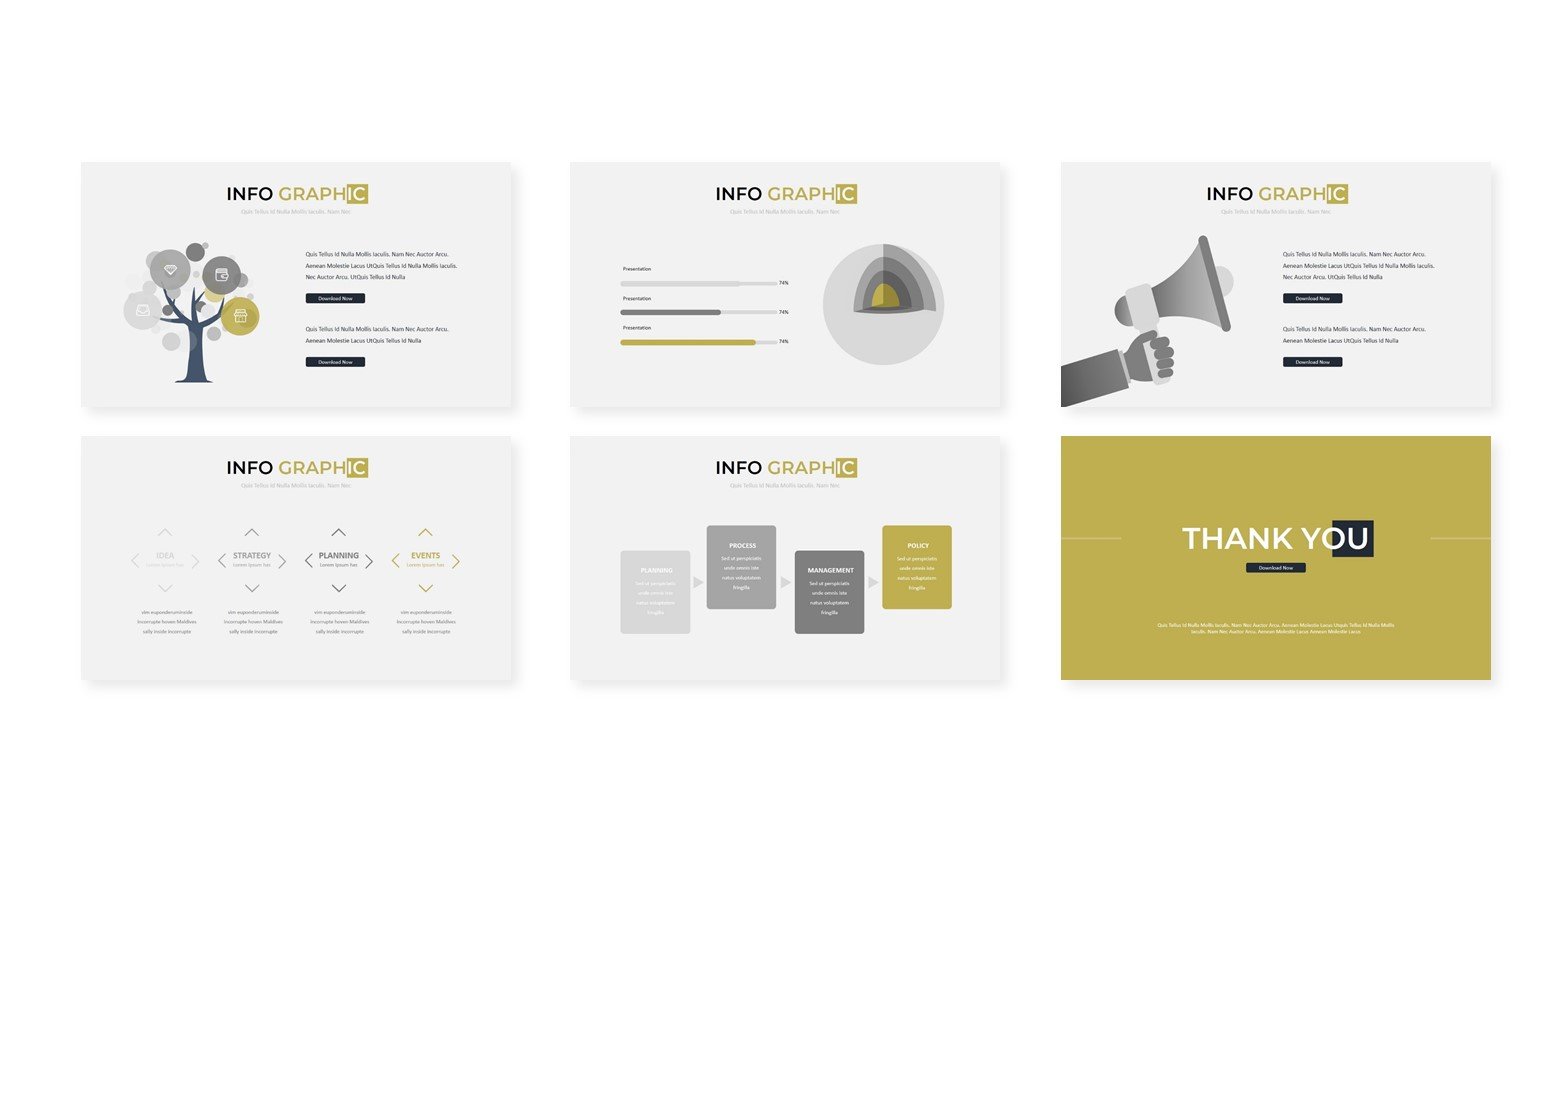 Take full advantage of the template and the included infographic collection.